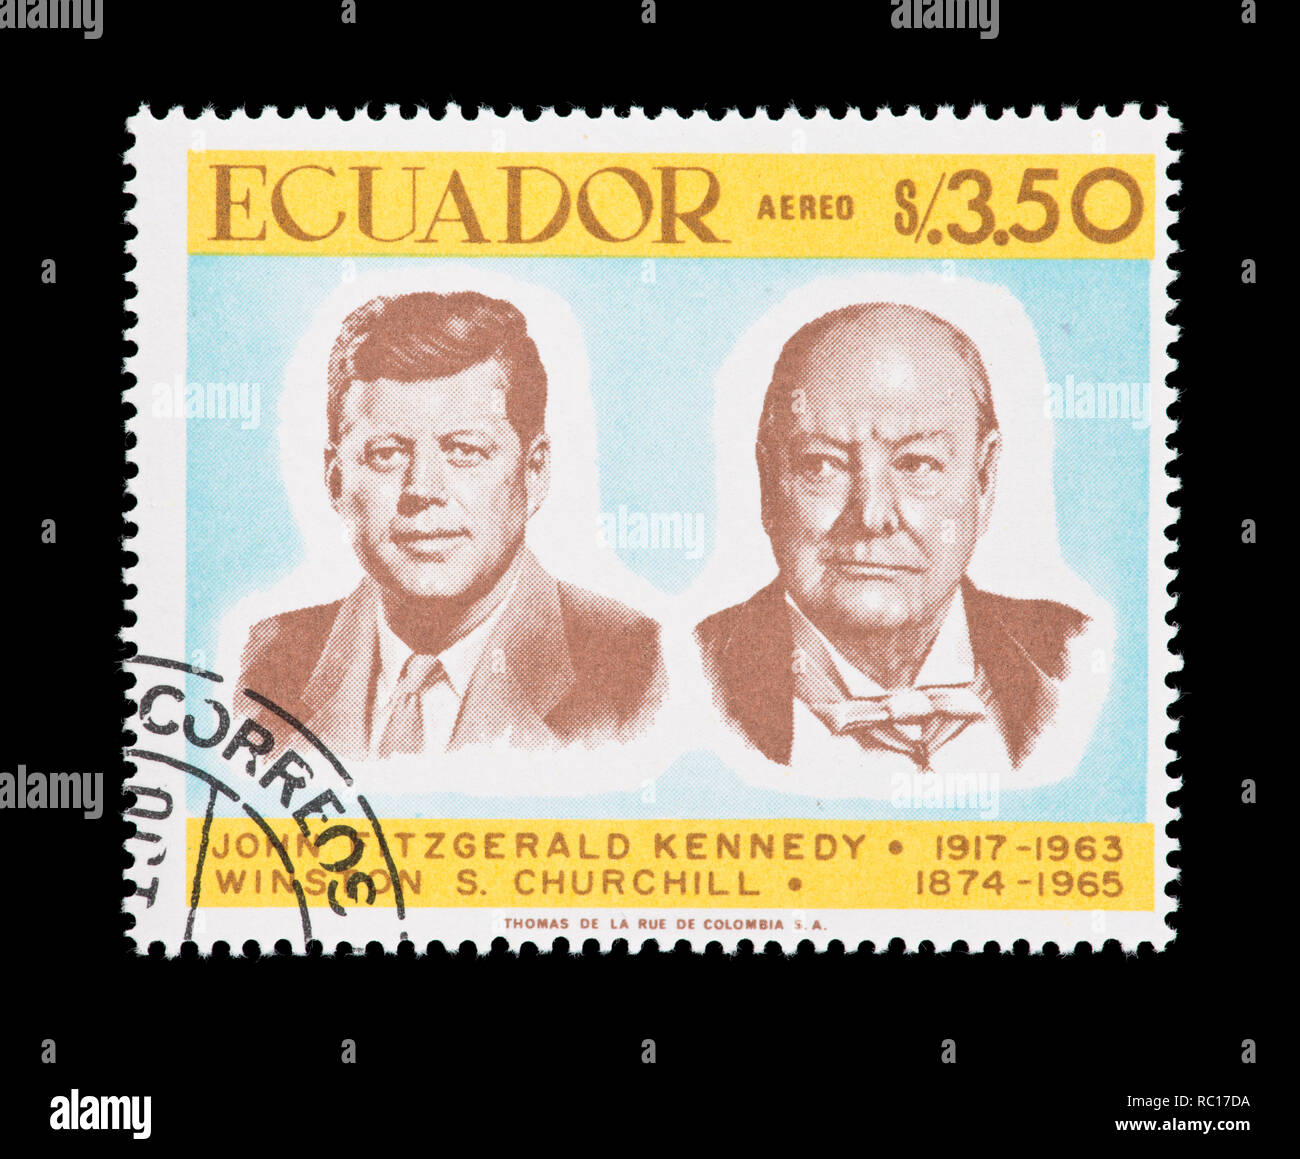 Postage stamp from Ecuador depicting John F. Kennedy, 50'th anniversary of his birth, and Winston Churchill. Stock Photo